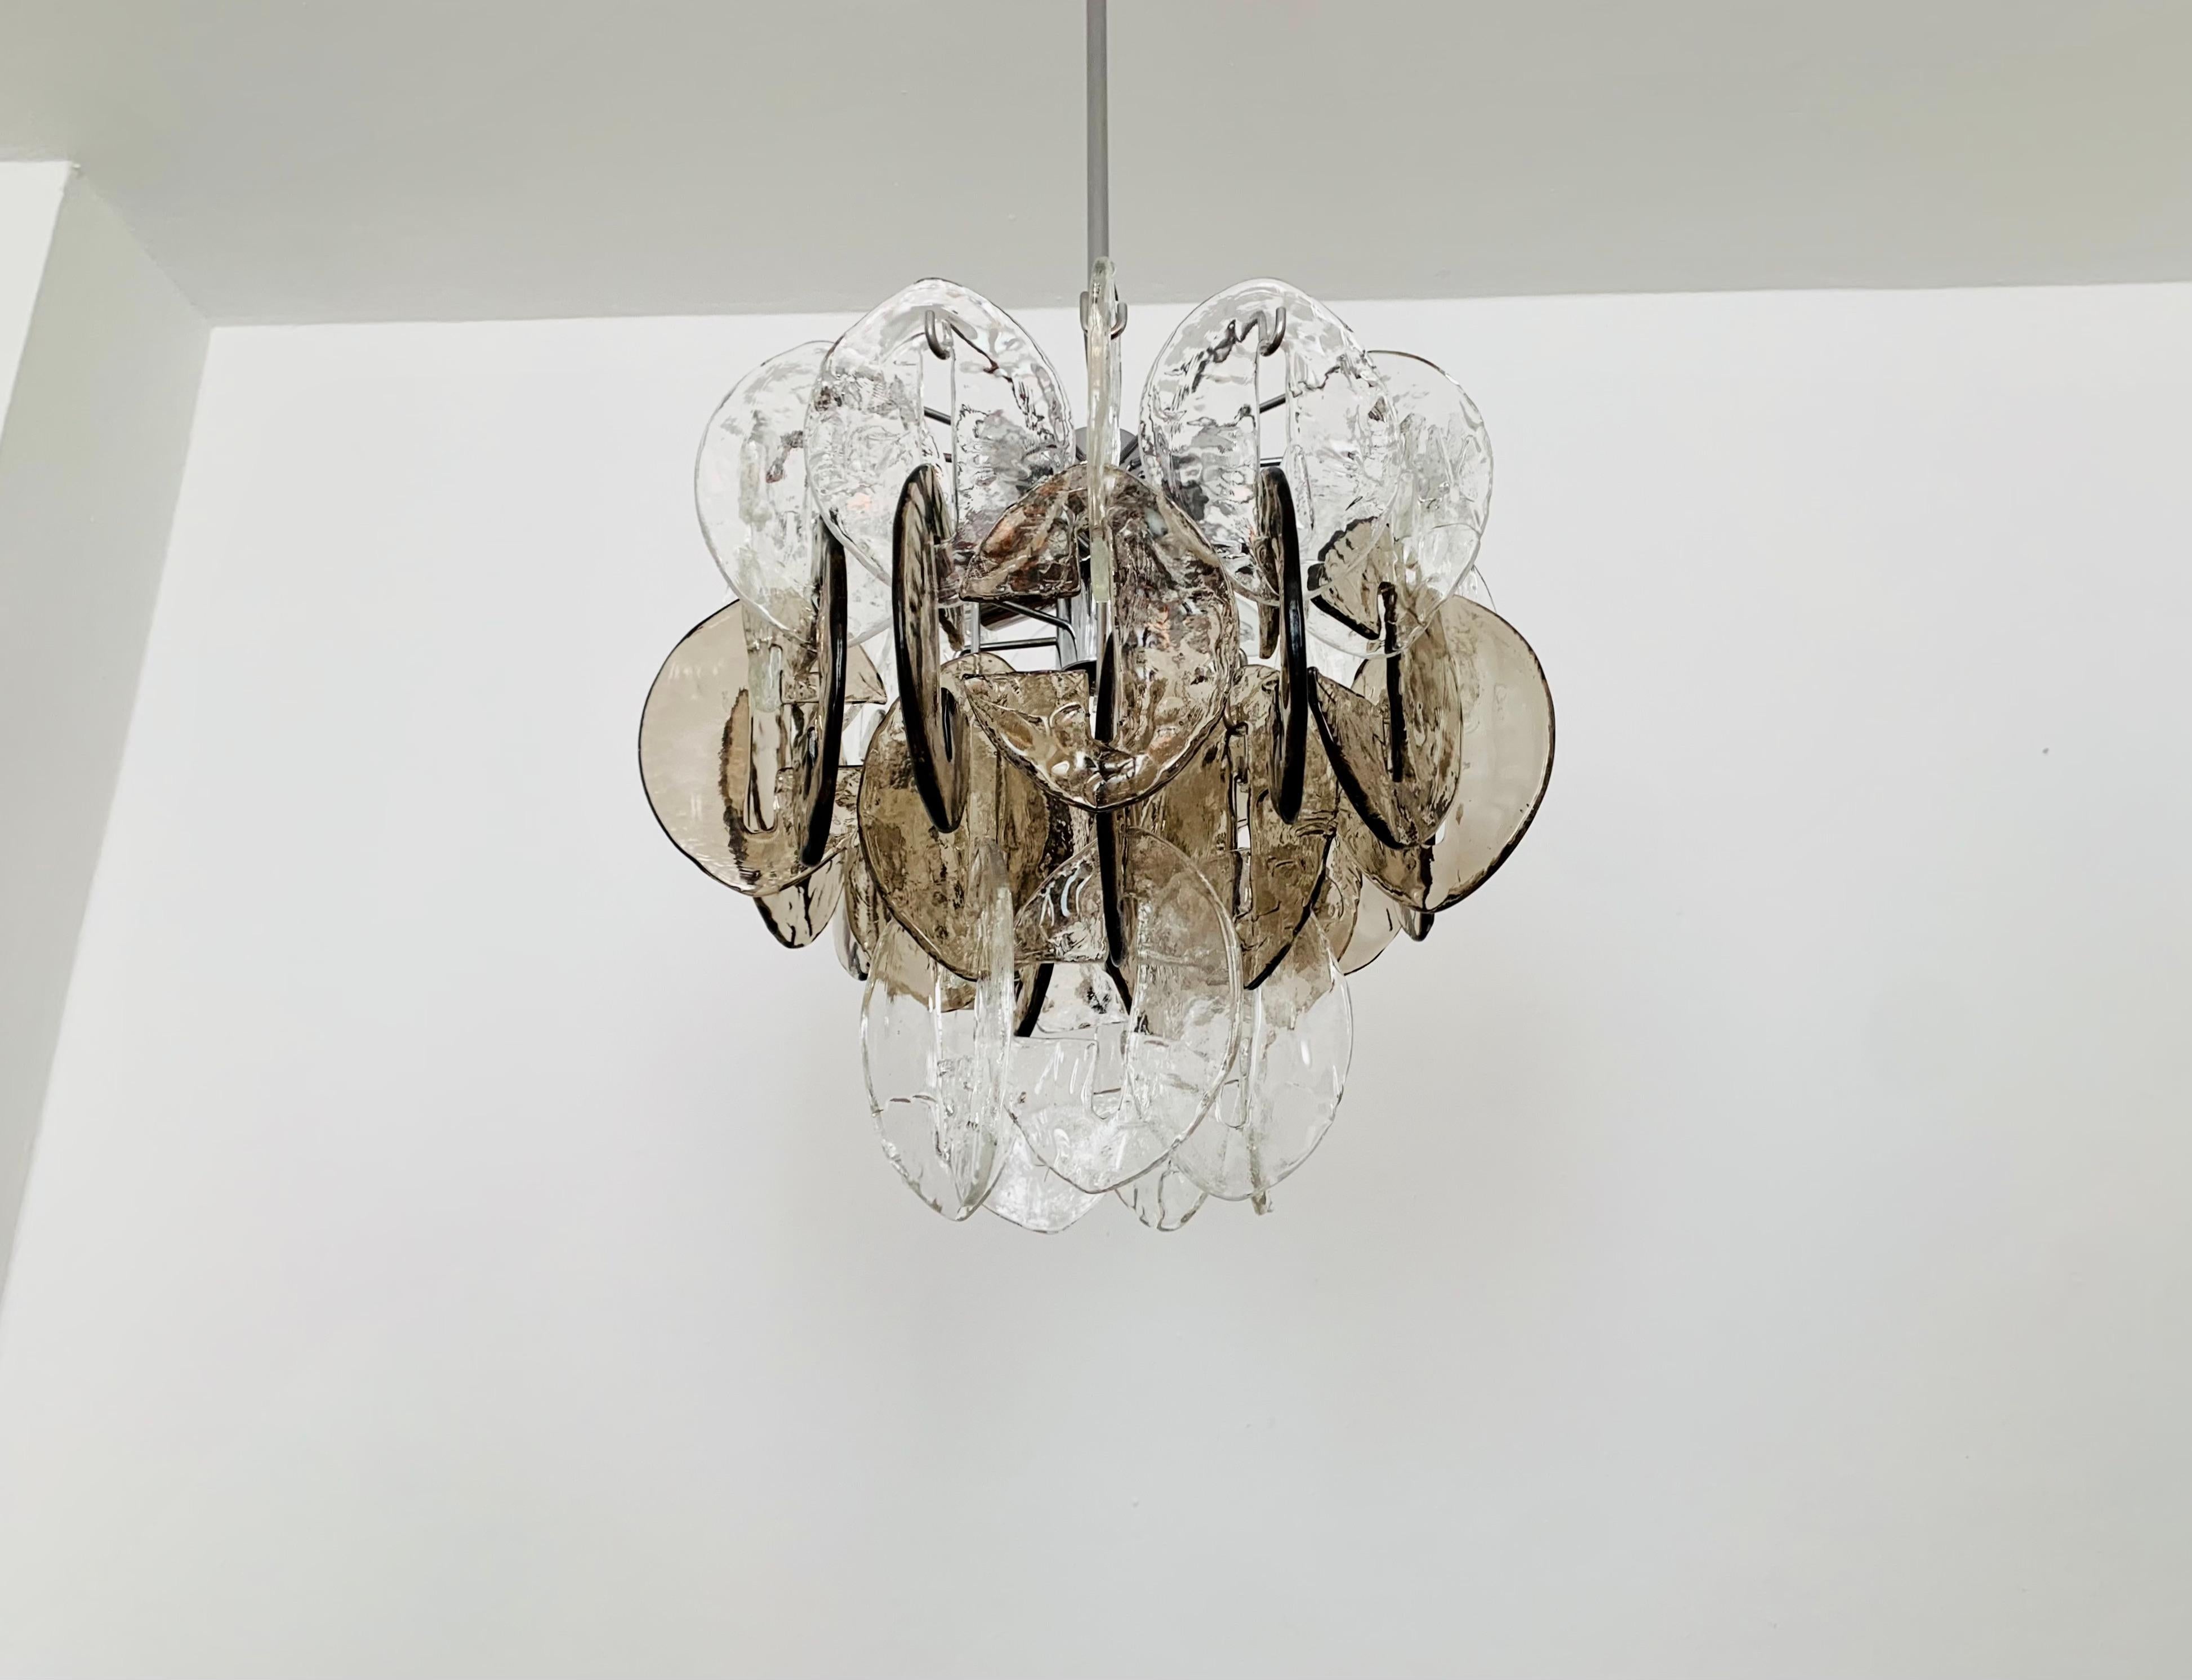 Very beautiful and large Murano glass ceiling lamp from the 1960s.
High quality workmanship and fantastic design.
The structure of the 32 glasses creates a very sparkling light.

Manufacturer: Kalmar Franken KG
Design: Carlo Nason

Condition:

Very